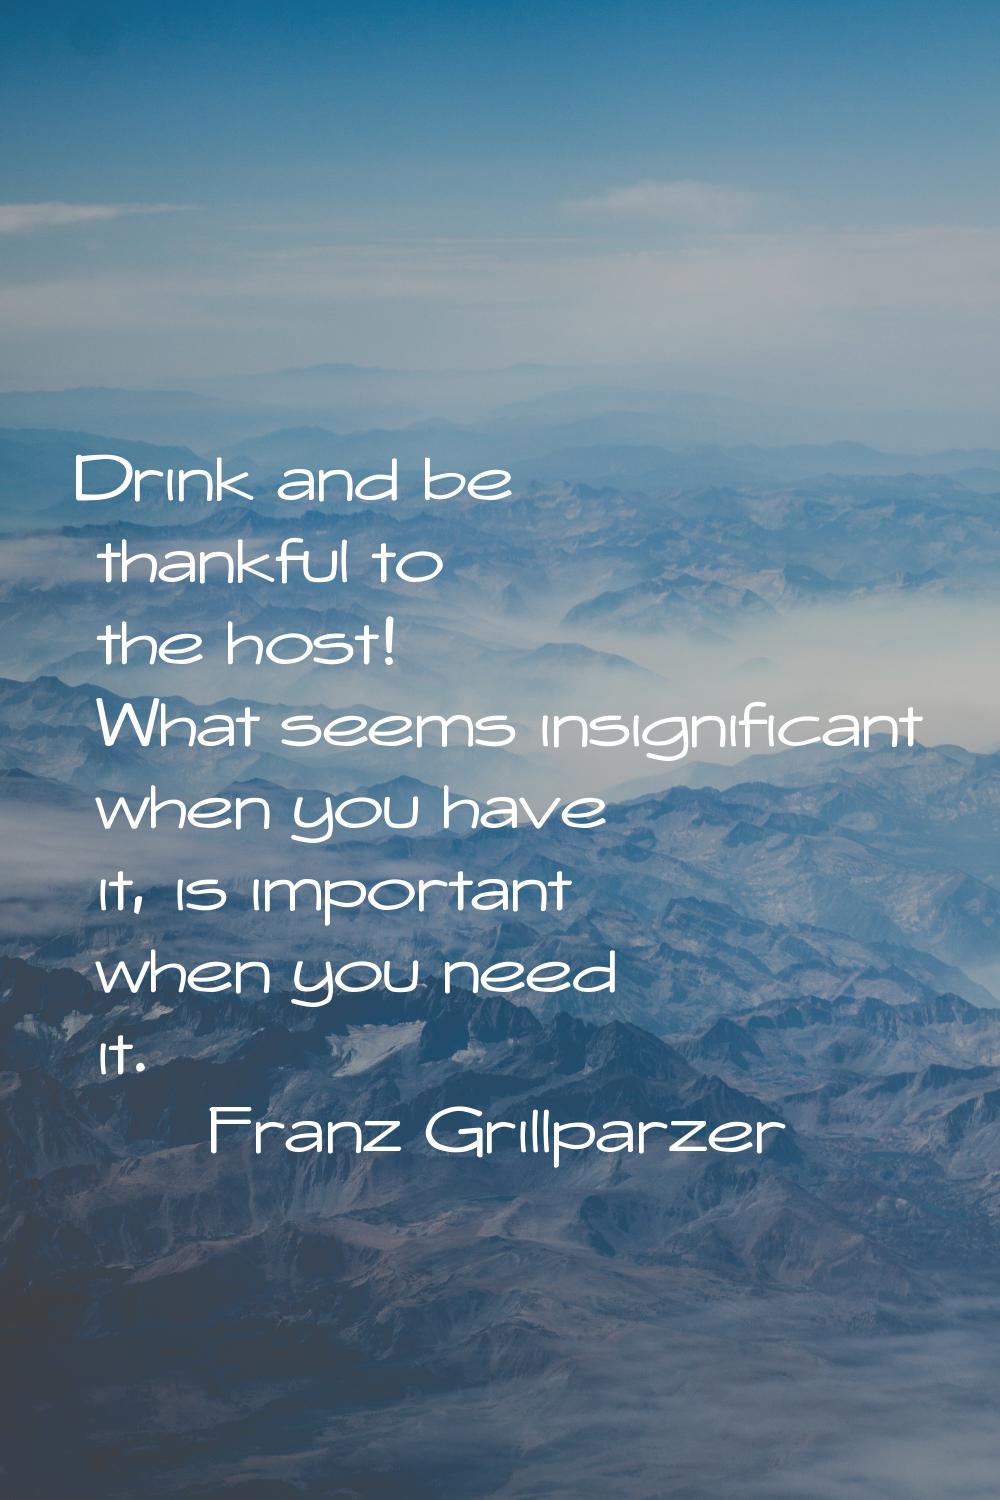 Drink and be thankful to the host! What seems insignificant when you have it, is important when you